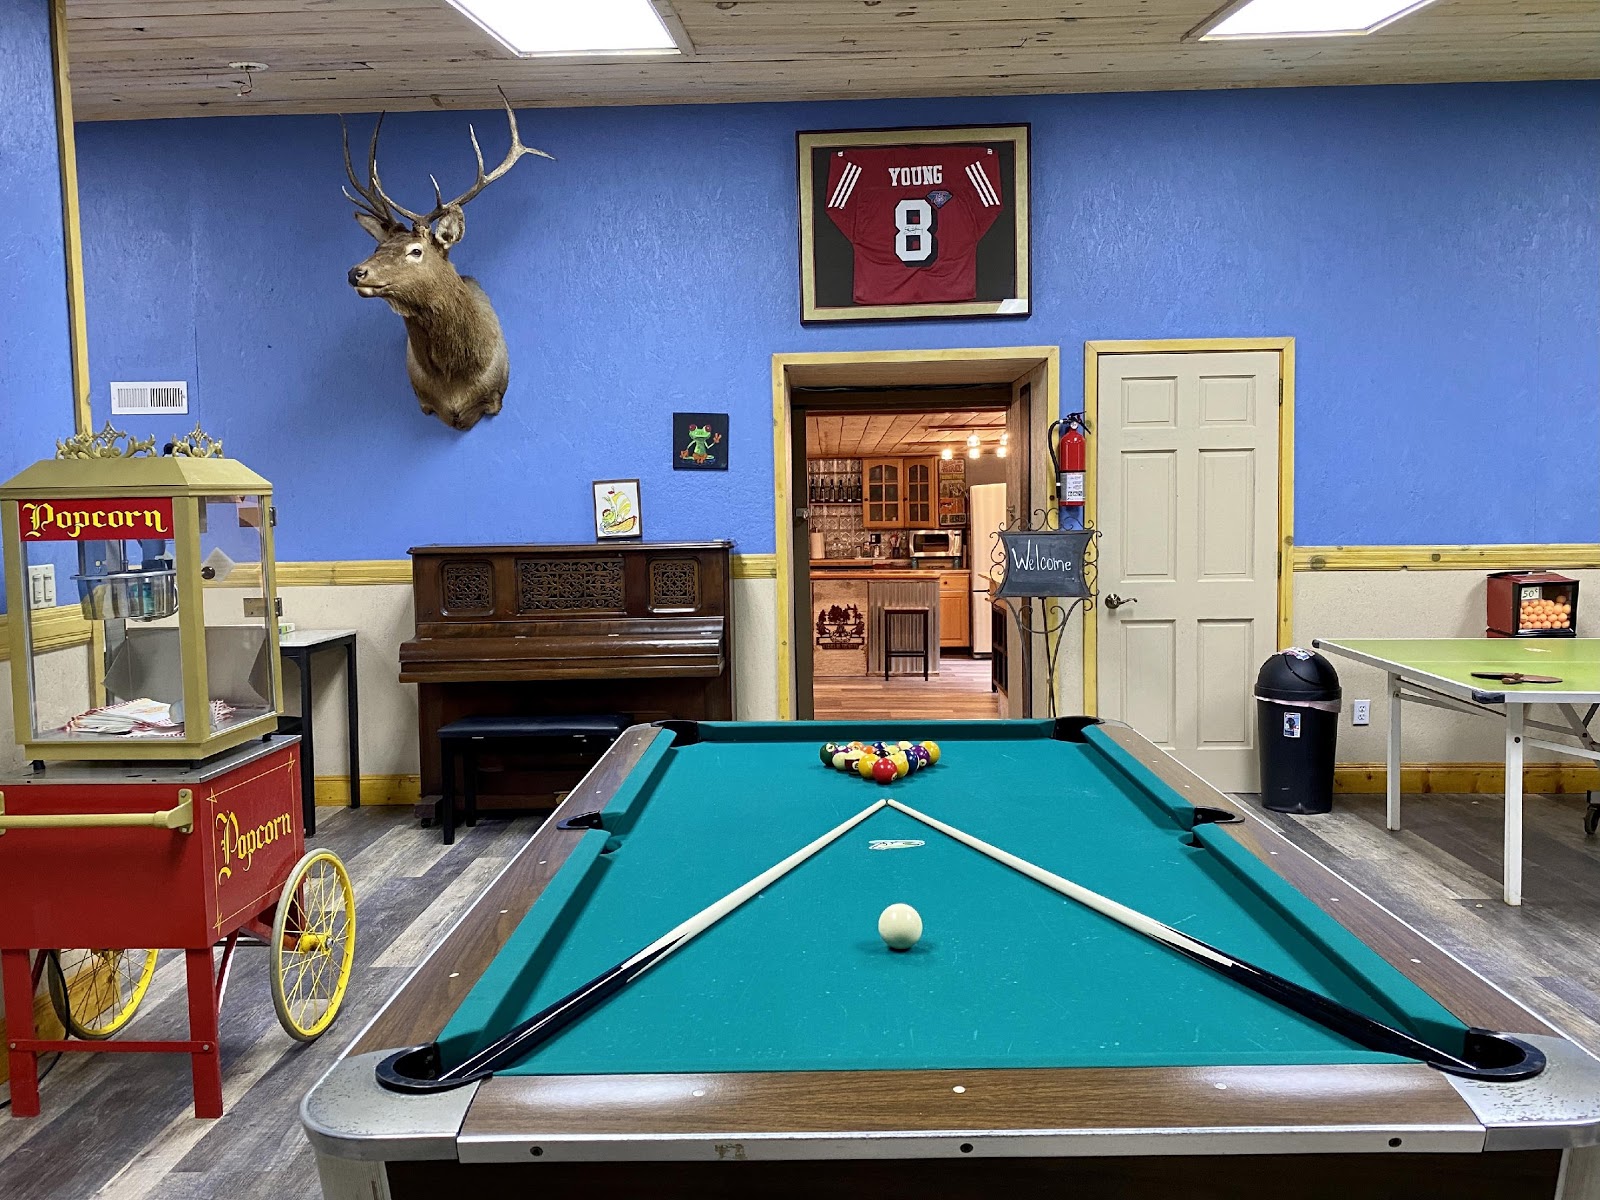 The recreation room is furnished with ping pong and pool tables, comfortable couches for relaxing, a small library, a big screen TV and video collection, and a selection of board games all for your enjoyment.